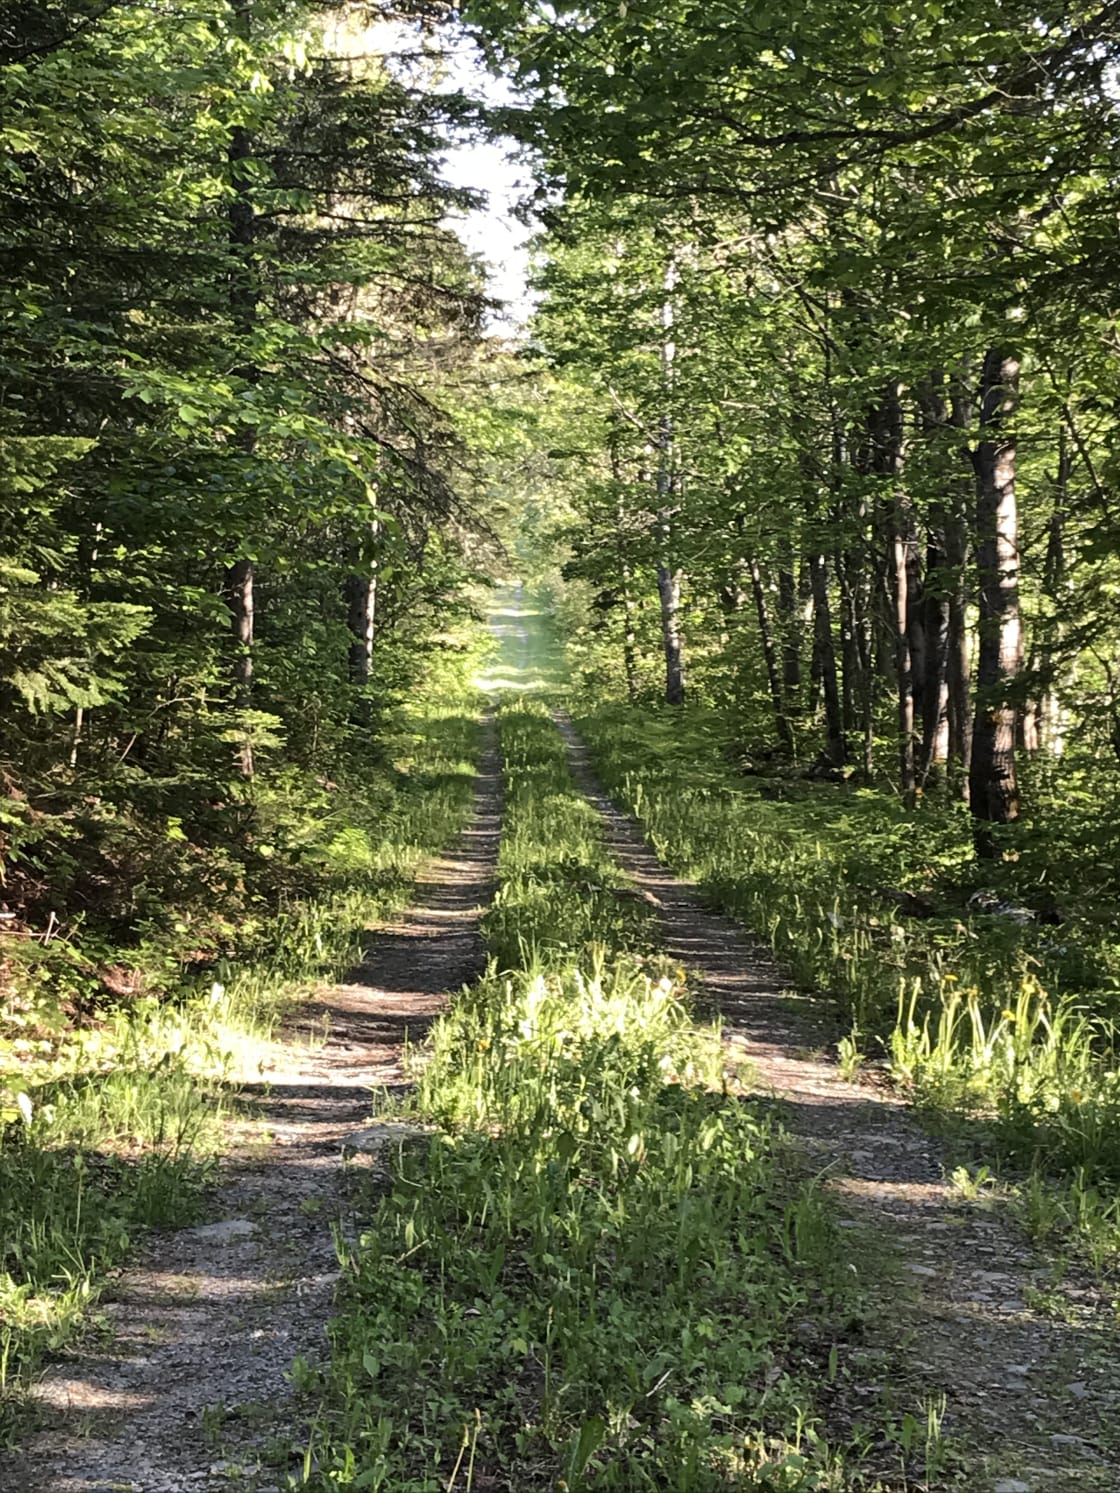 The "leaf tunnel" road leads to Spring Pond campsite. The farm has miles of field edges and road for the mountain biking and hiking enthusiast.